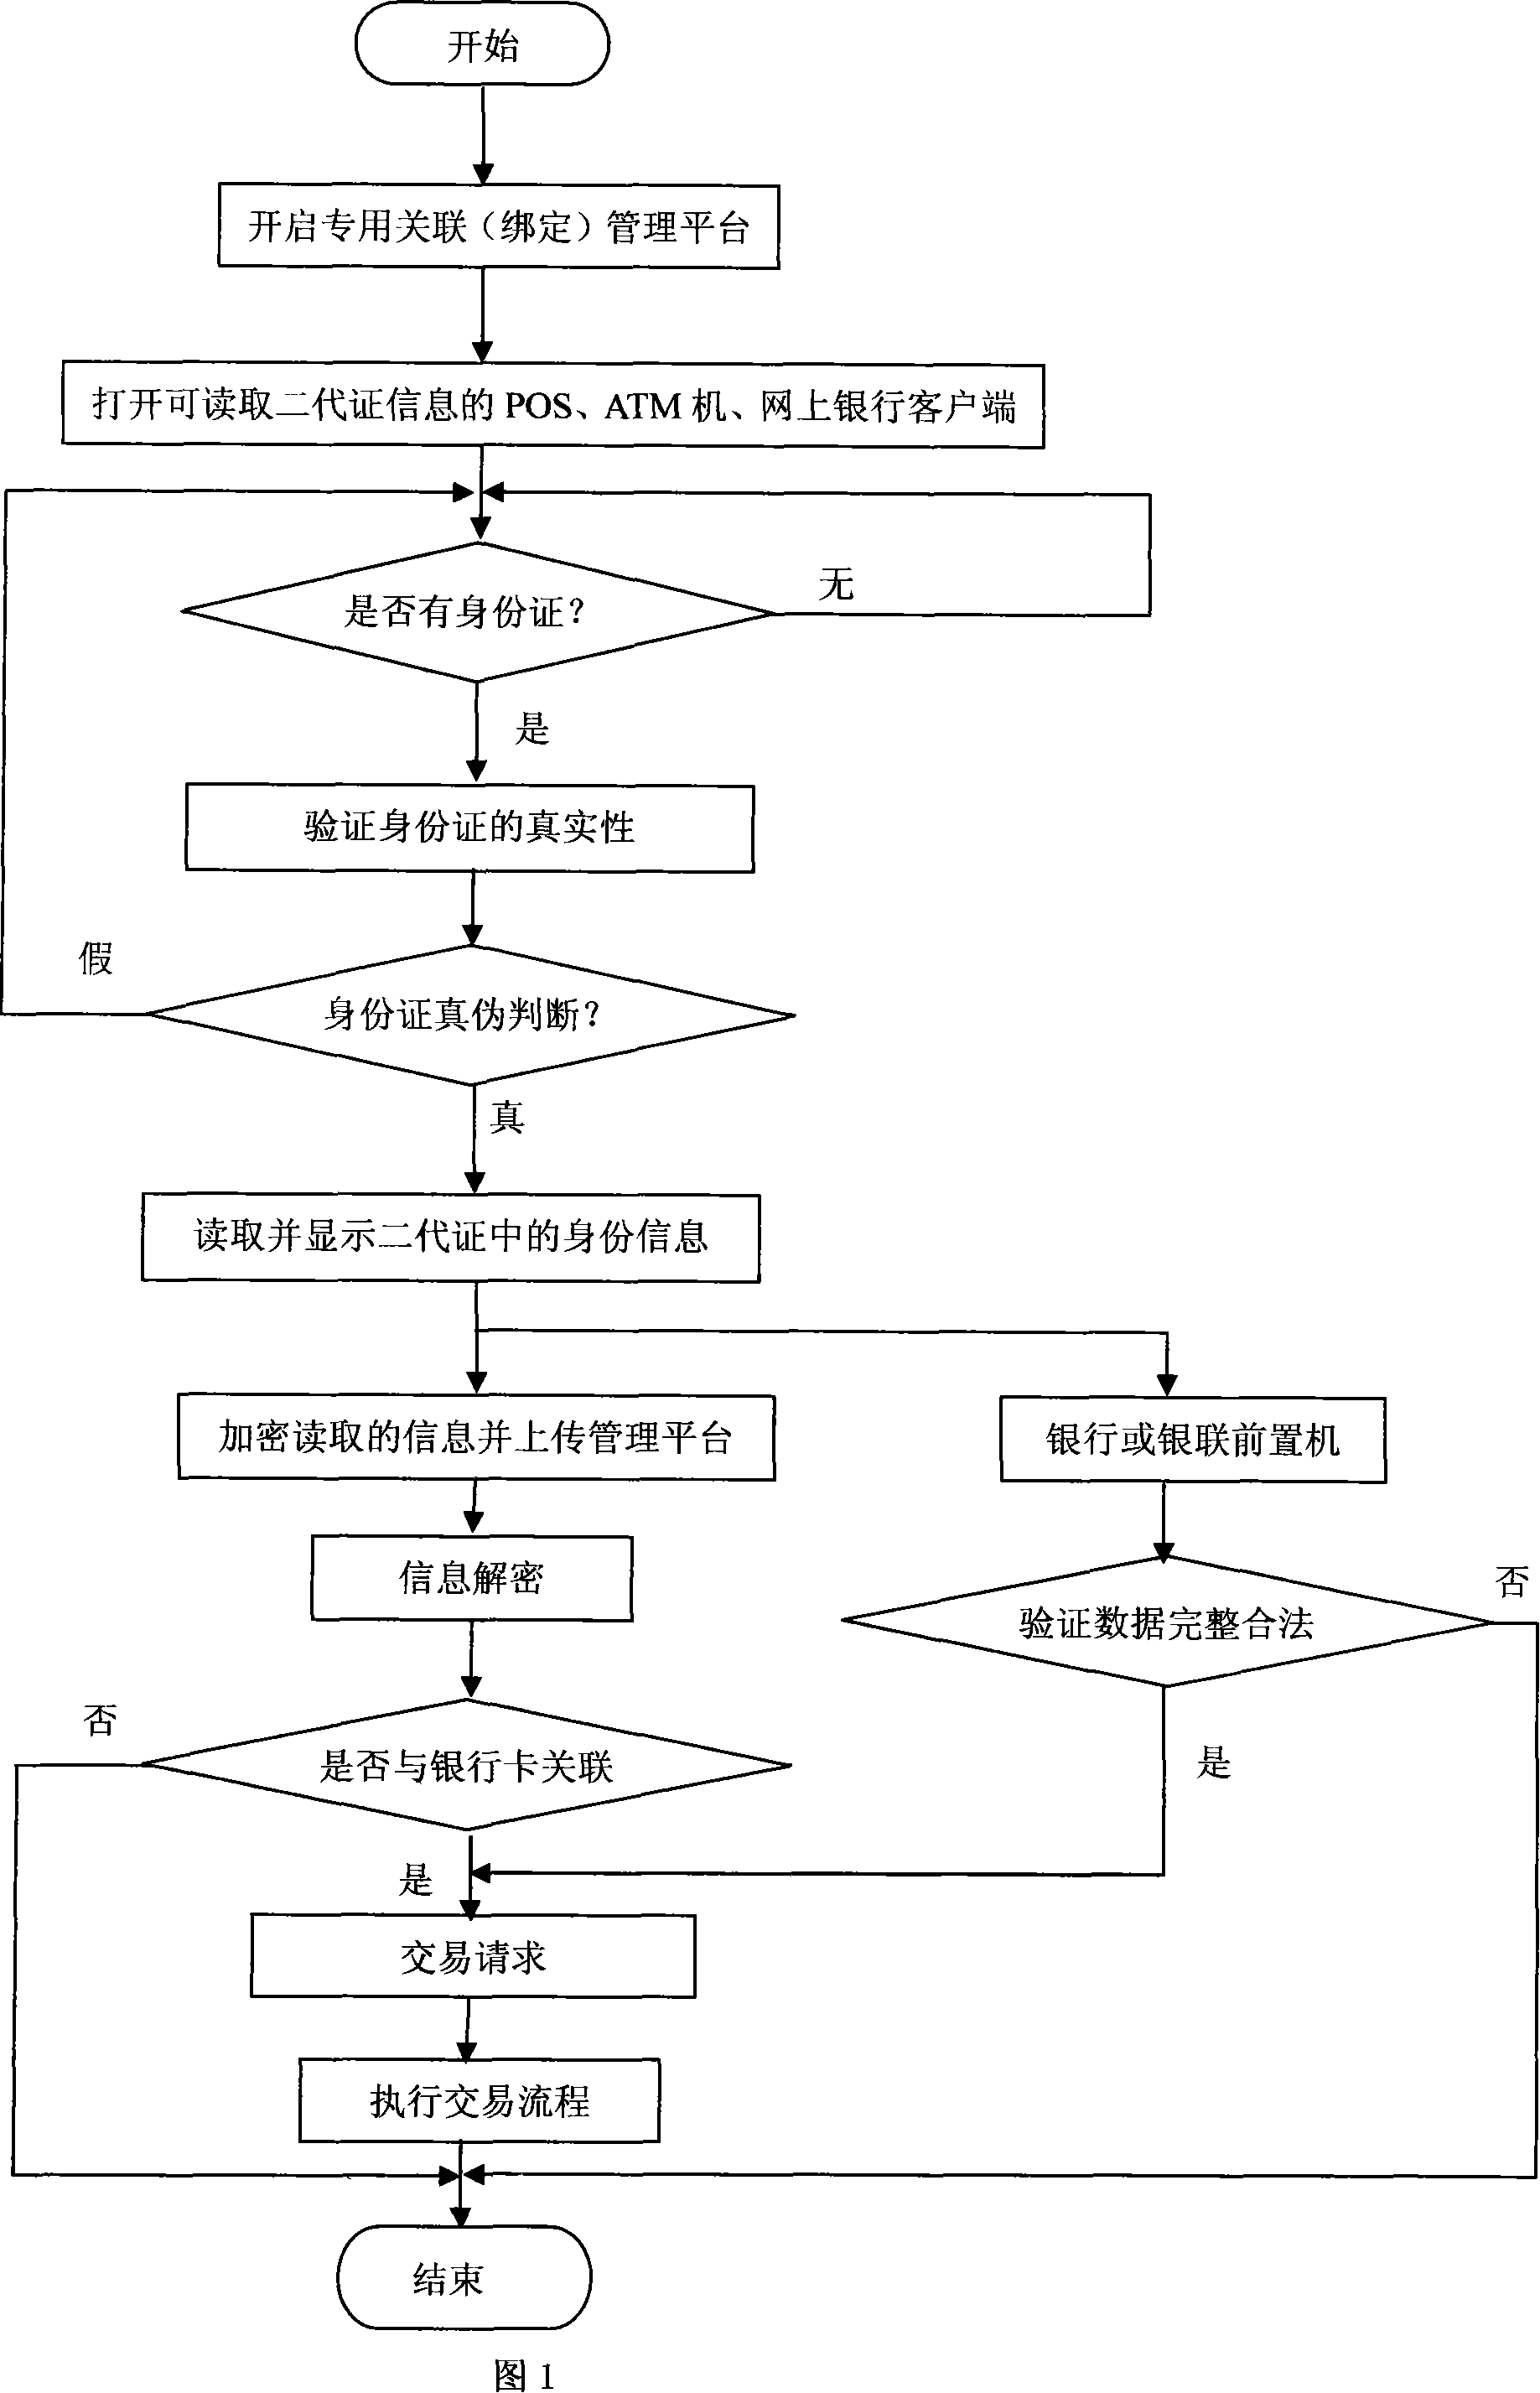 Method for associating (binding) bank card for payment adopting the second generation identity card